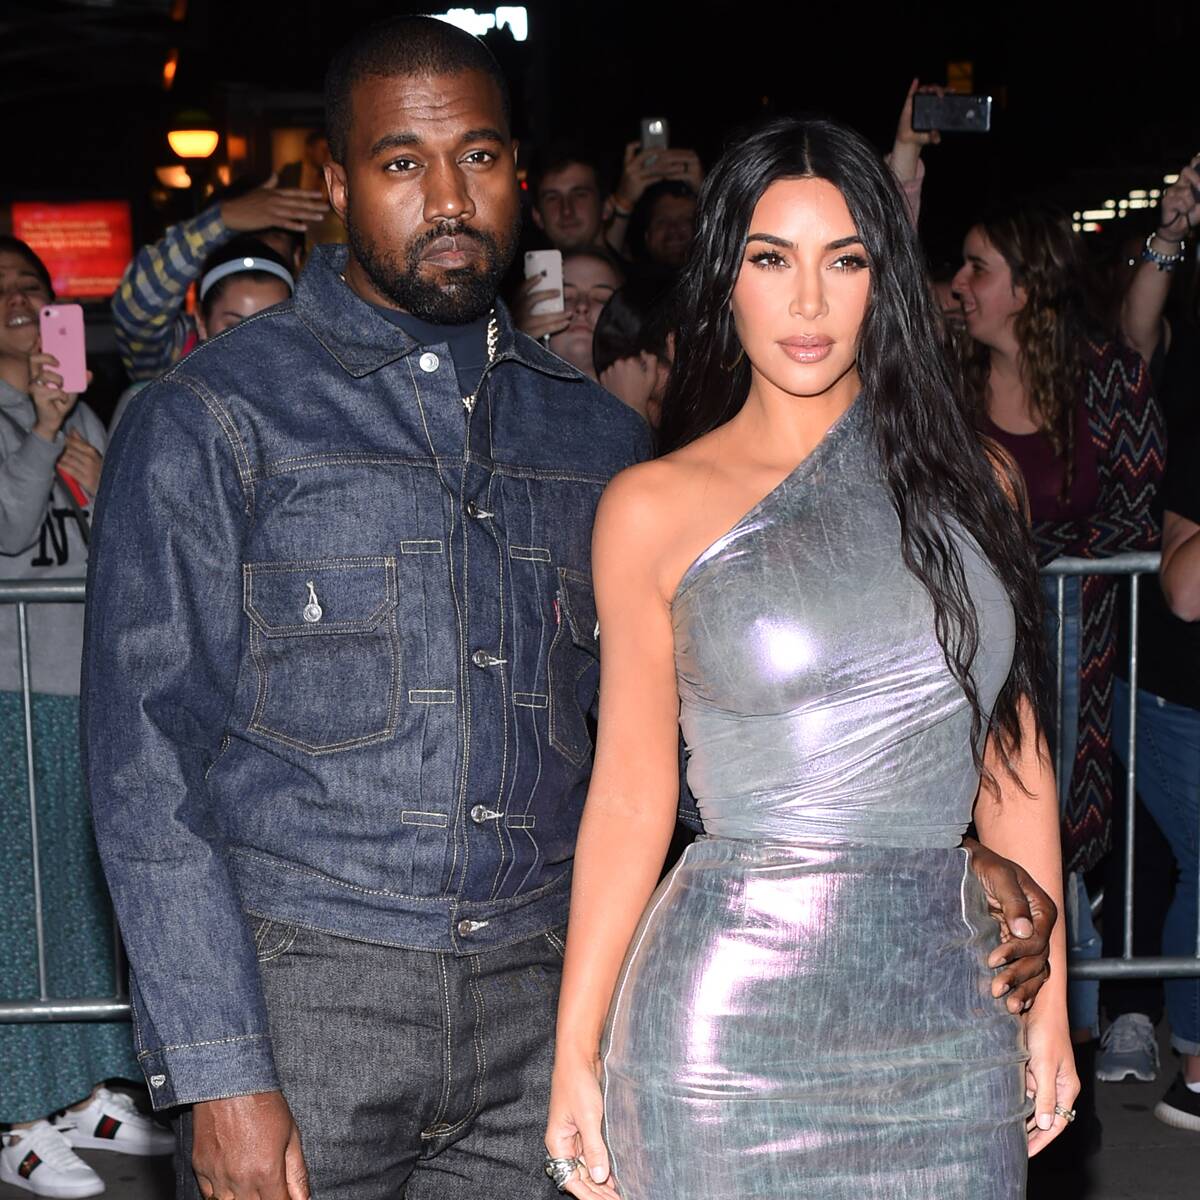 Kim Kardashian "Would Never Discourage" Kanye West From Seeing Their Kids as He Moves Out